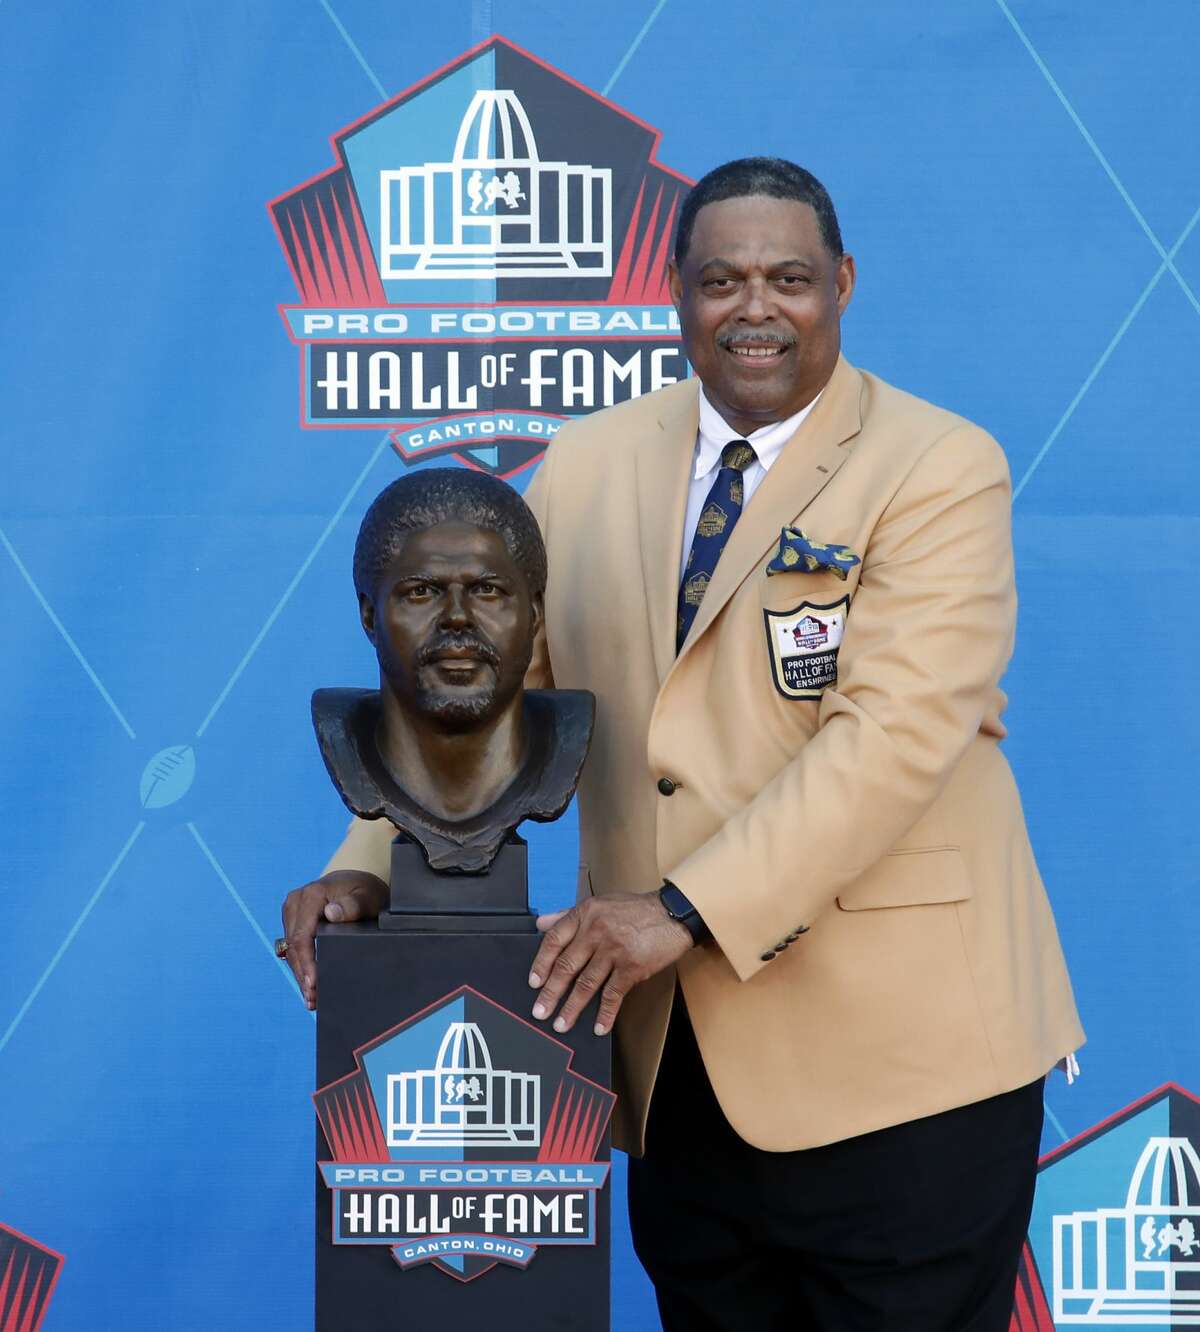 Former NFL player Robert Brazile poses with a bust of himself during an induction ceremony at the Pro Football Hall of Fame Saturday, Aug. 4, 2018, in Canton, Ohio. (AP Photo/Gene J. Puskar)